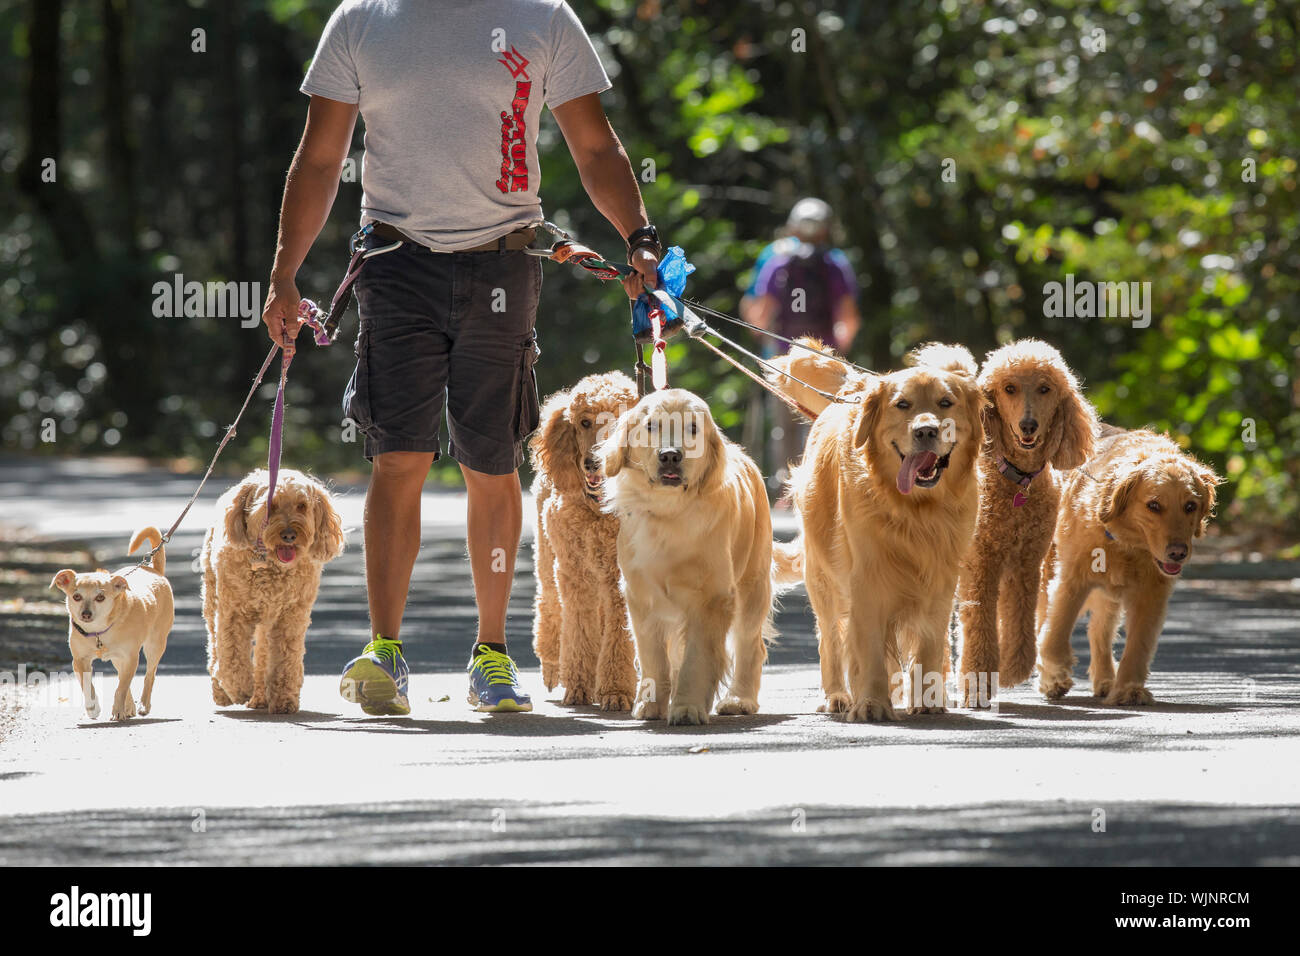 Professional dog walker and trainer Juan Carlos Zuniga taking some of his canine 'clients' out for exercise in a park. Stock Photo